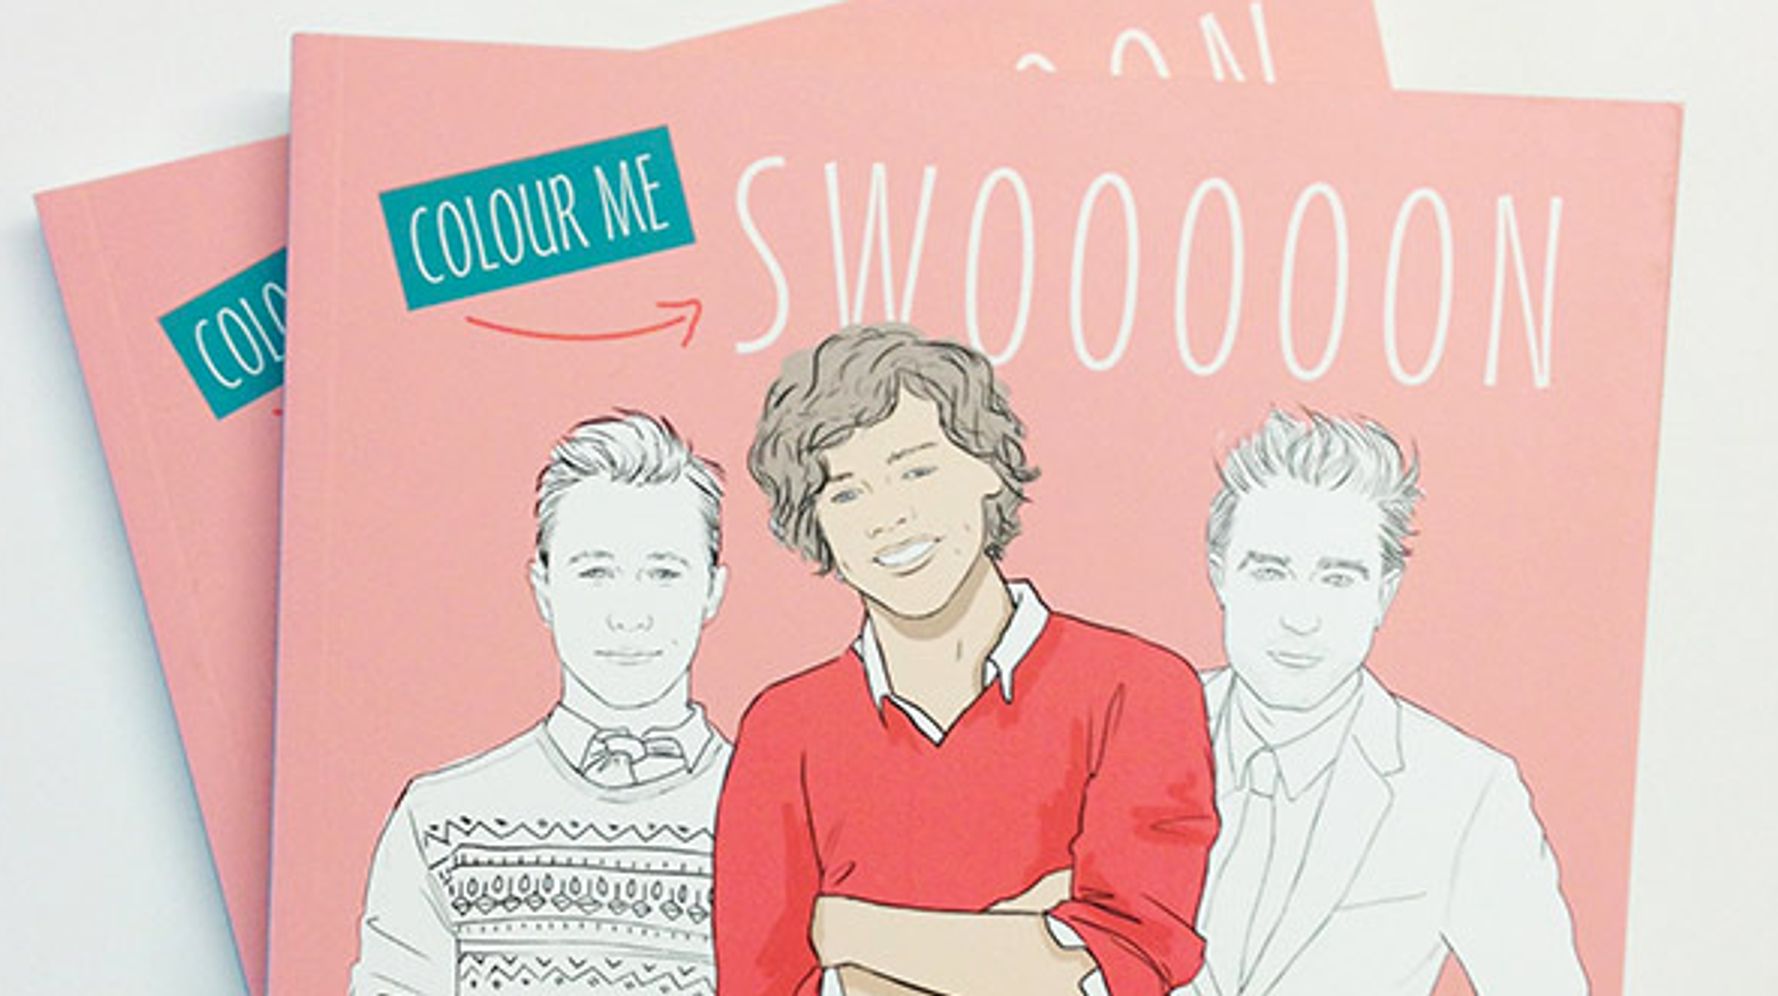 Download 9 Adult Colouring Books That Are Most Definitely Not For Kids Huffpost Uk Life